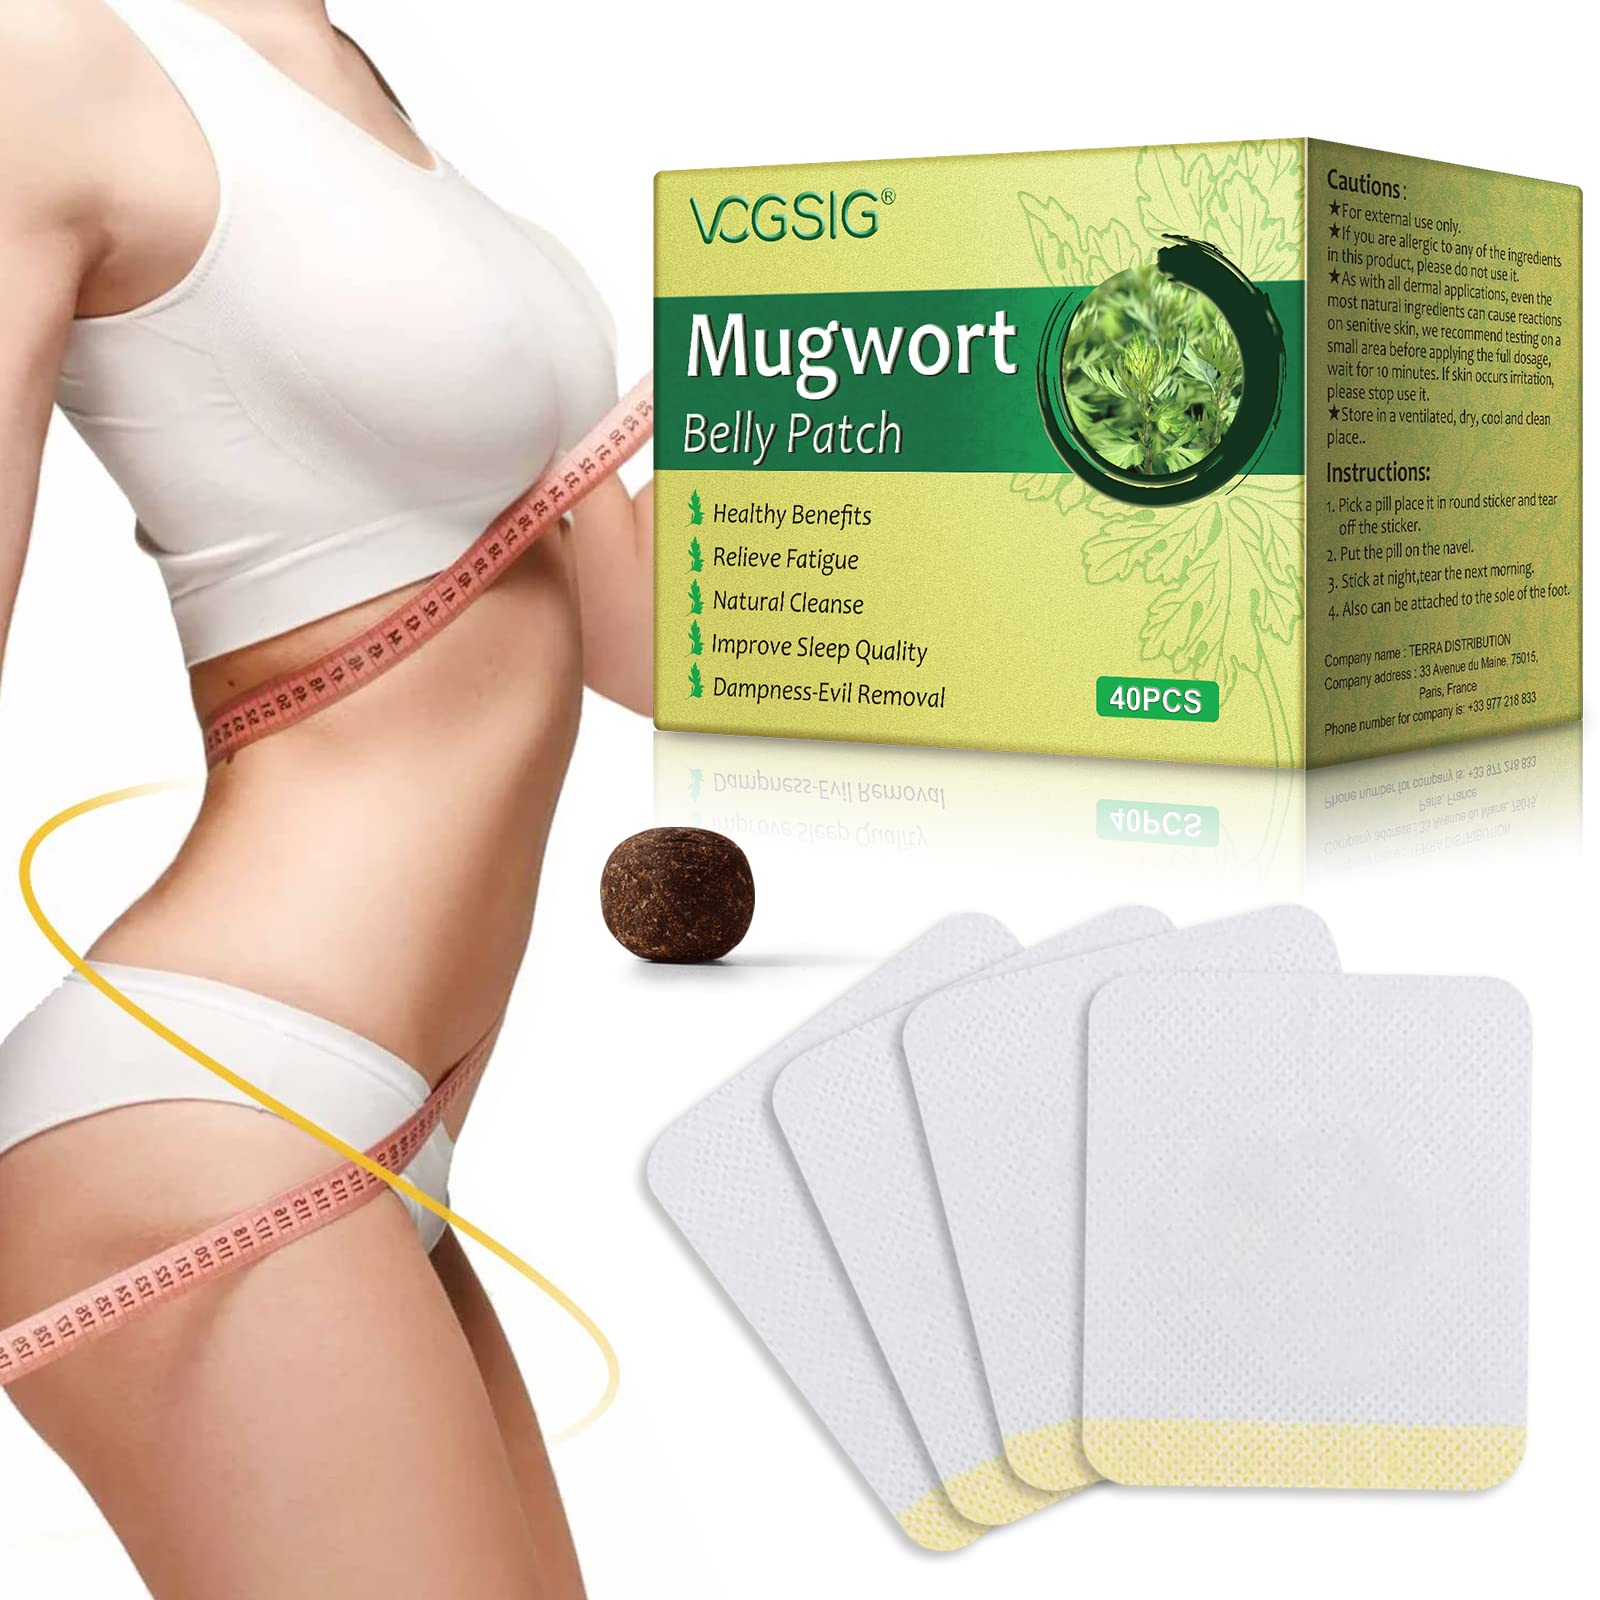 Tudiqe Wormwood Belly Patch, 40Pcs Natural Herb Mugwort Essence Pills and 40Pcs Moxibustion Patch, Herbal Abdomen Waist Patch， Reflexology, Moxibustion Belly Button Patch for Men and Women